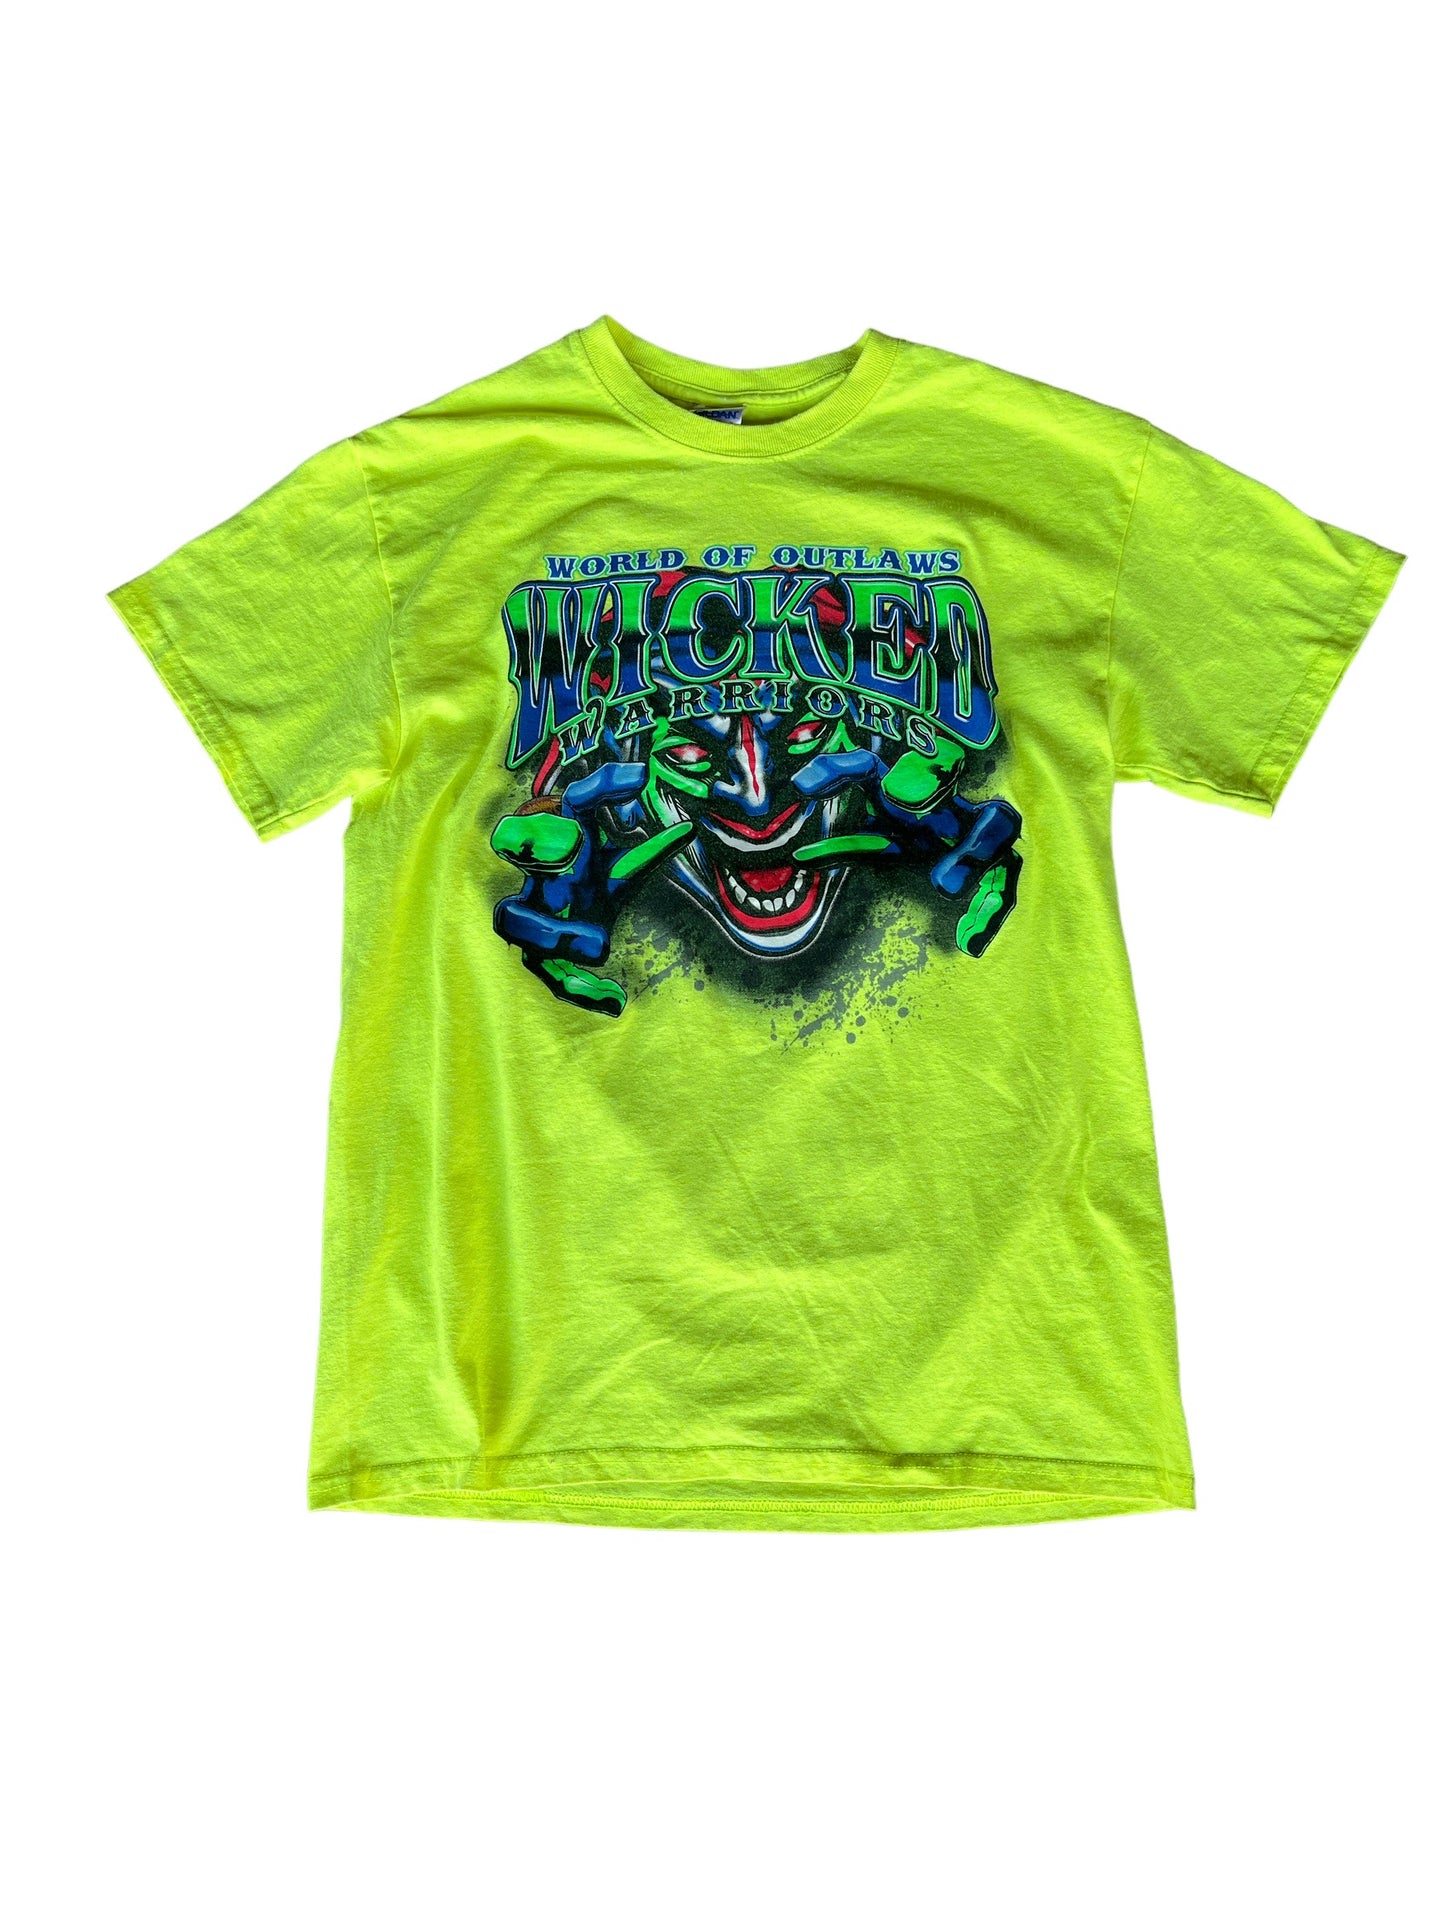 Heavyweight "World Of Outlaws Wicked Warriors" Tee